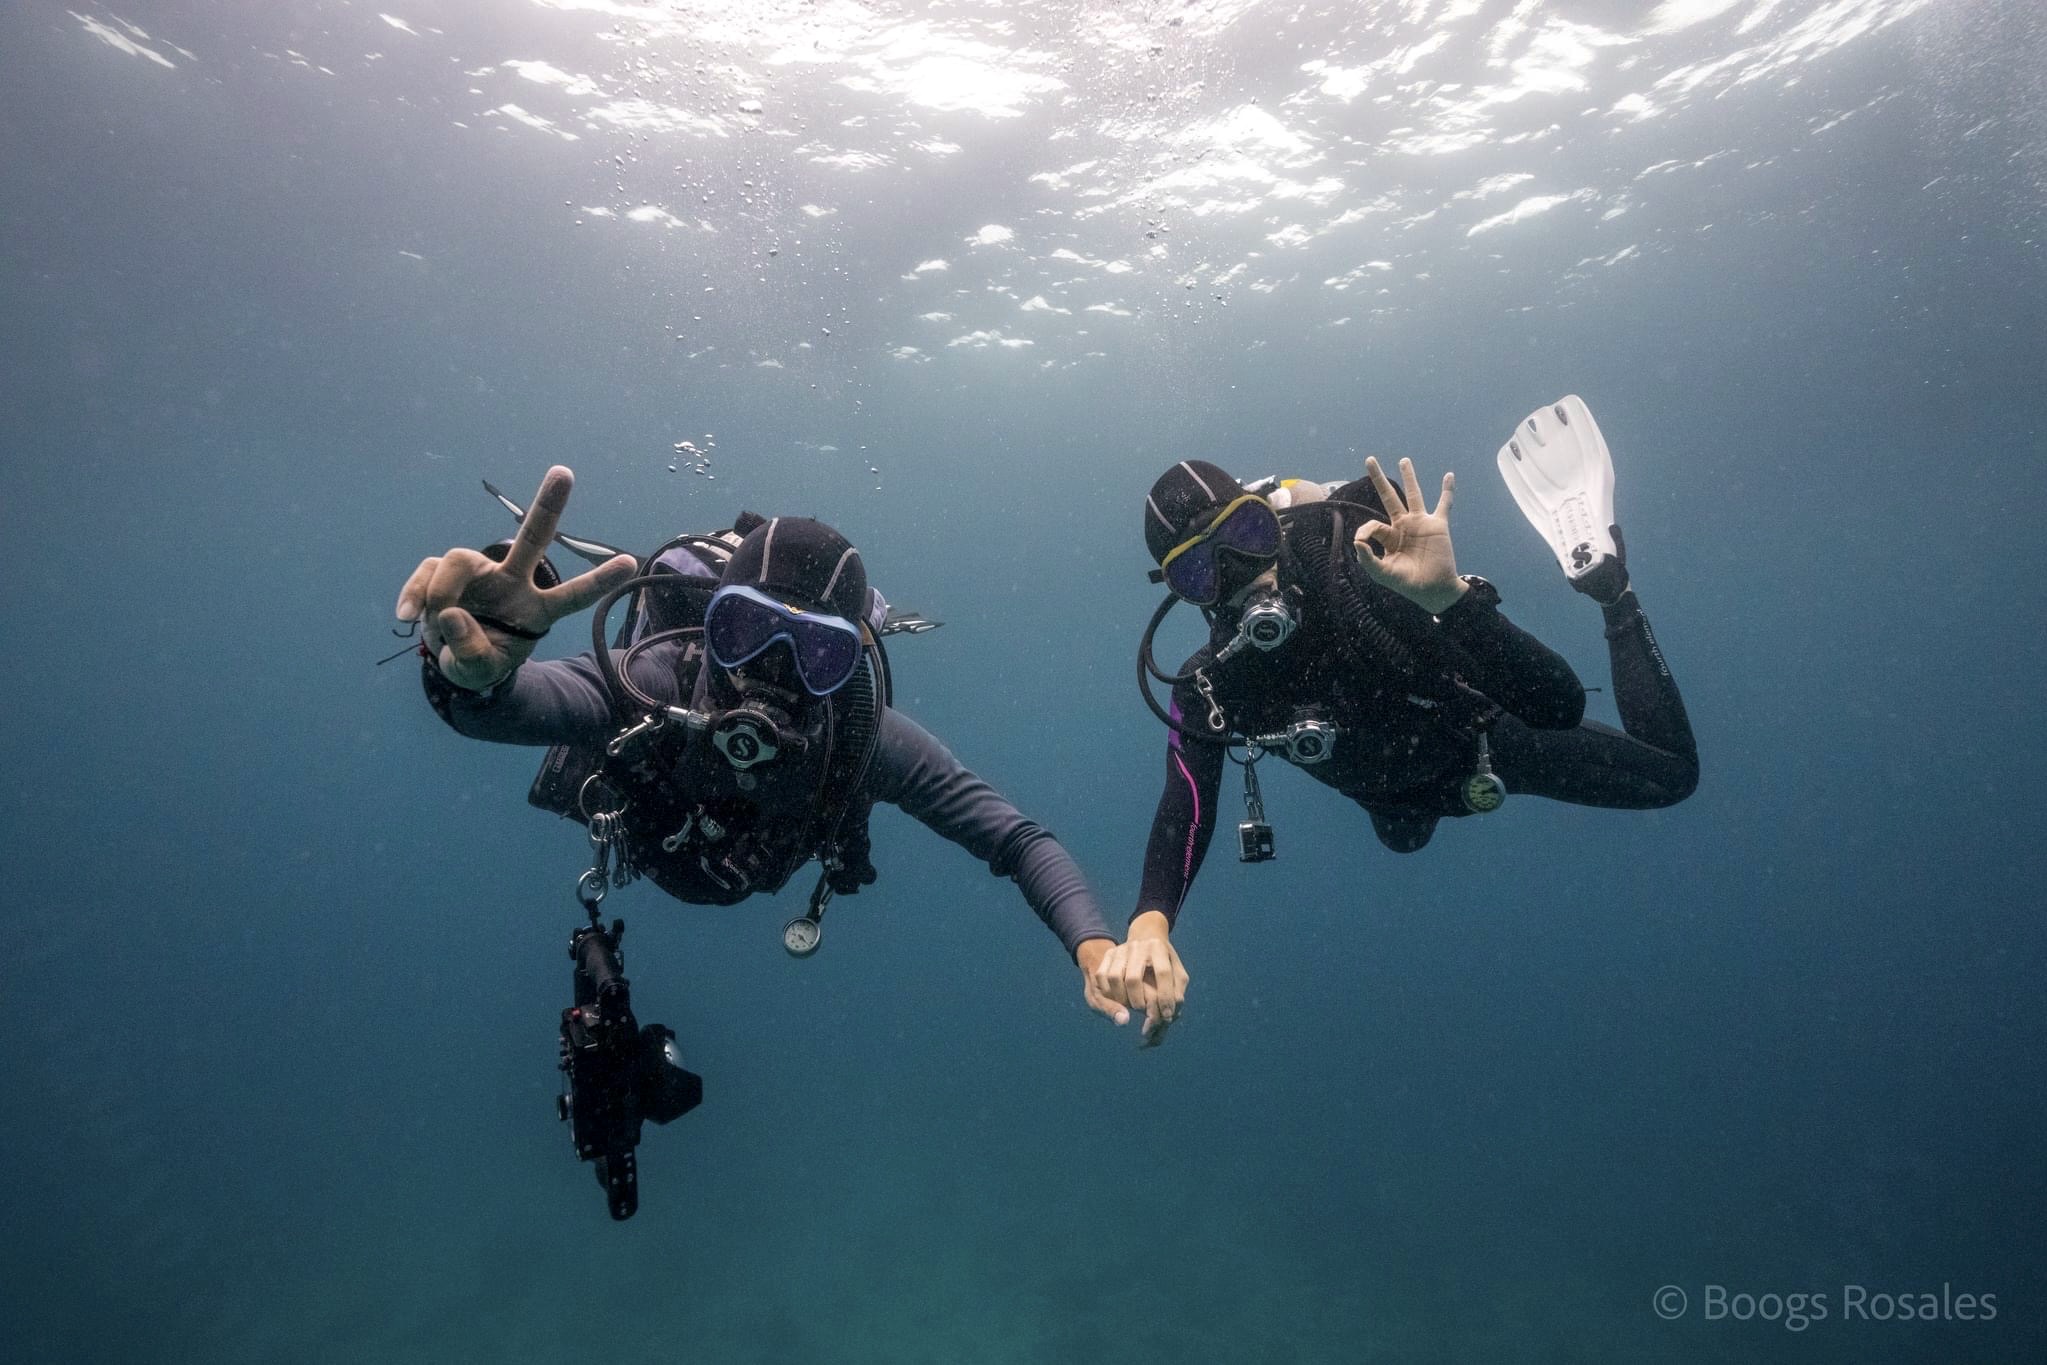 Newly engaged scuba couple Gage Veridiano and Joanne Villablanca holding hands and making connections together underwater